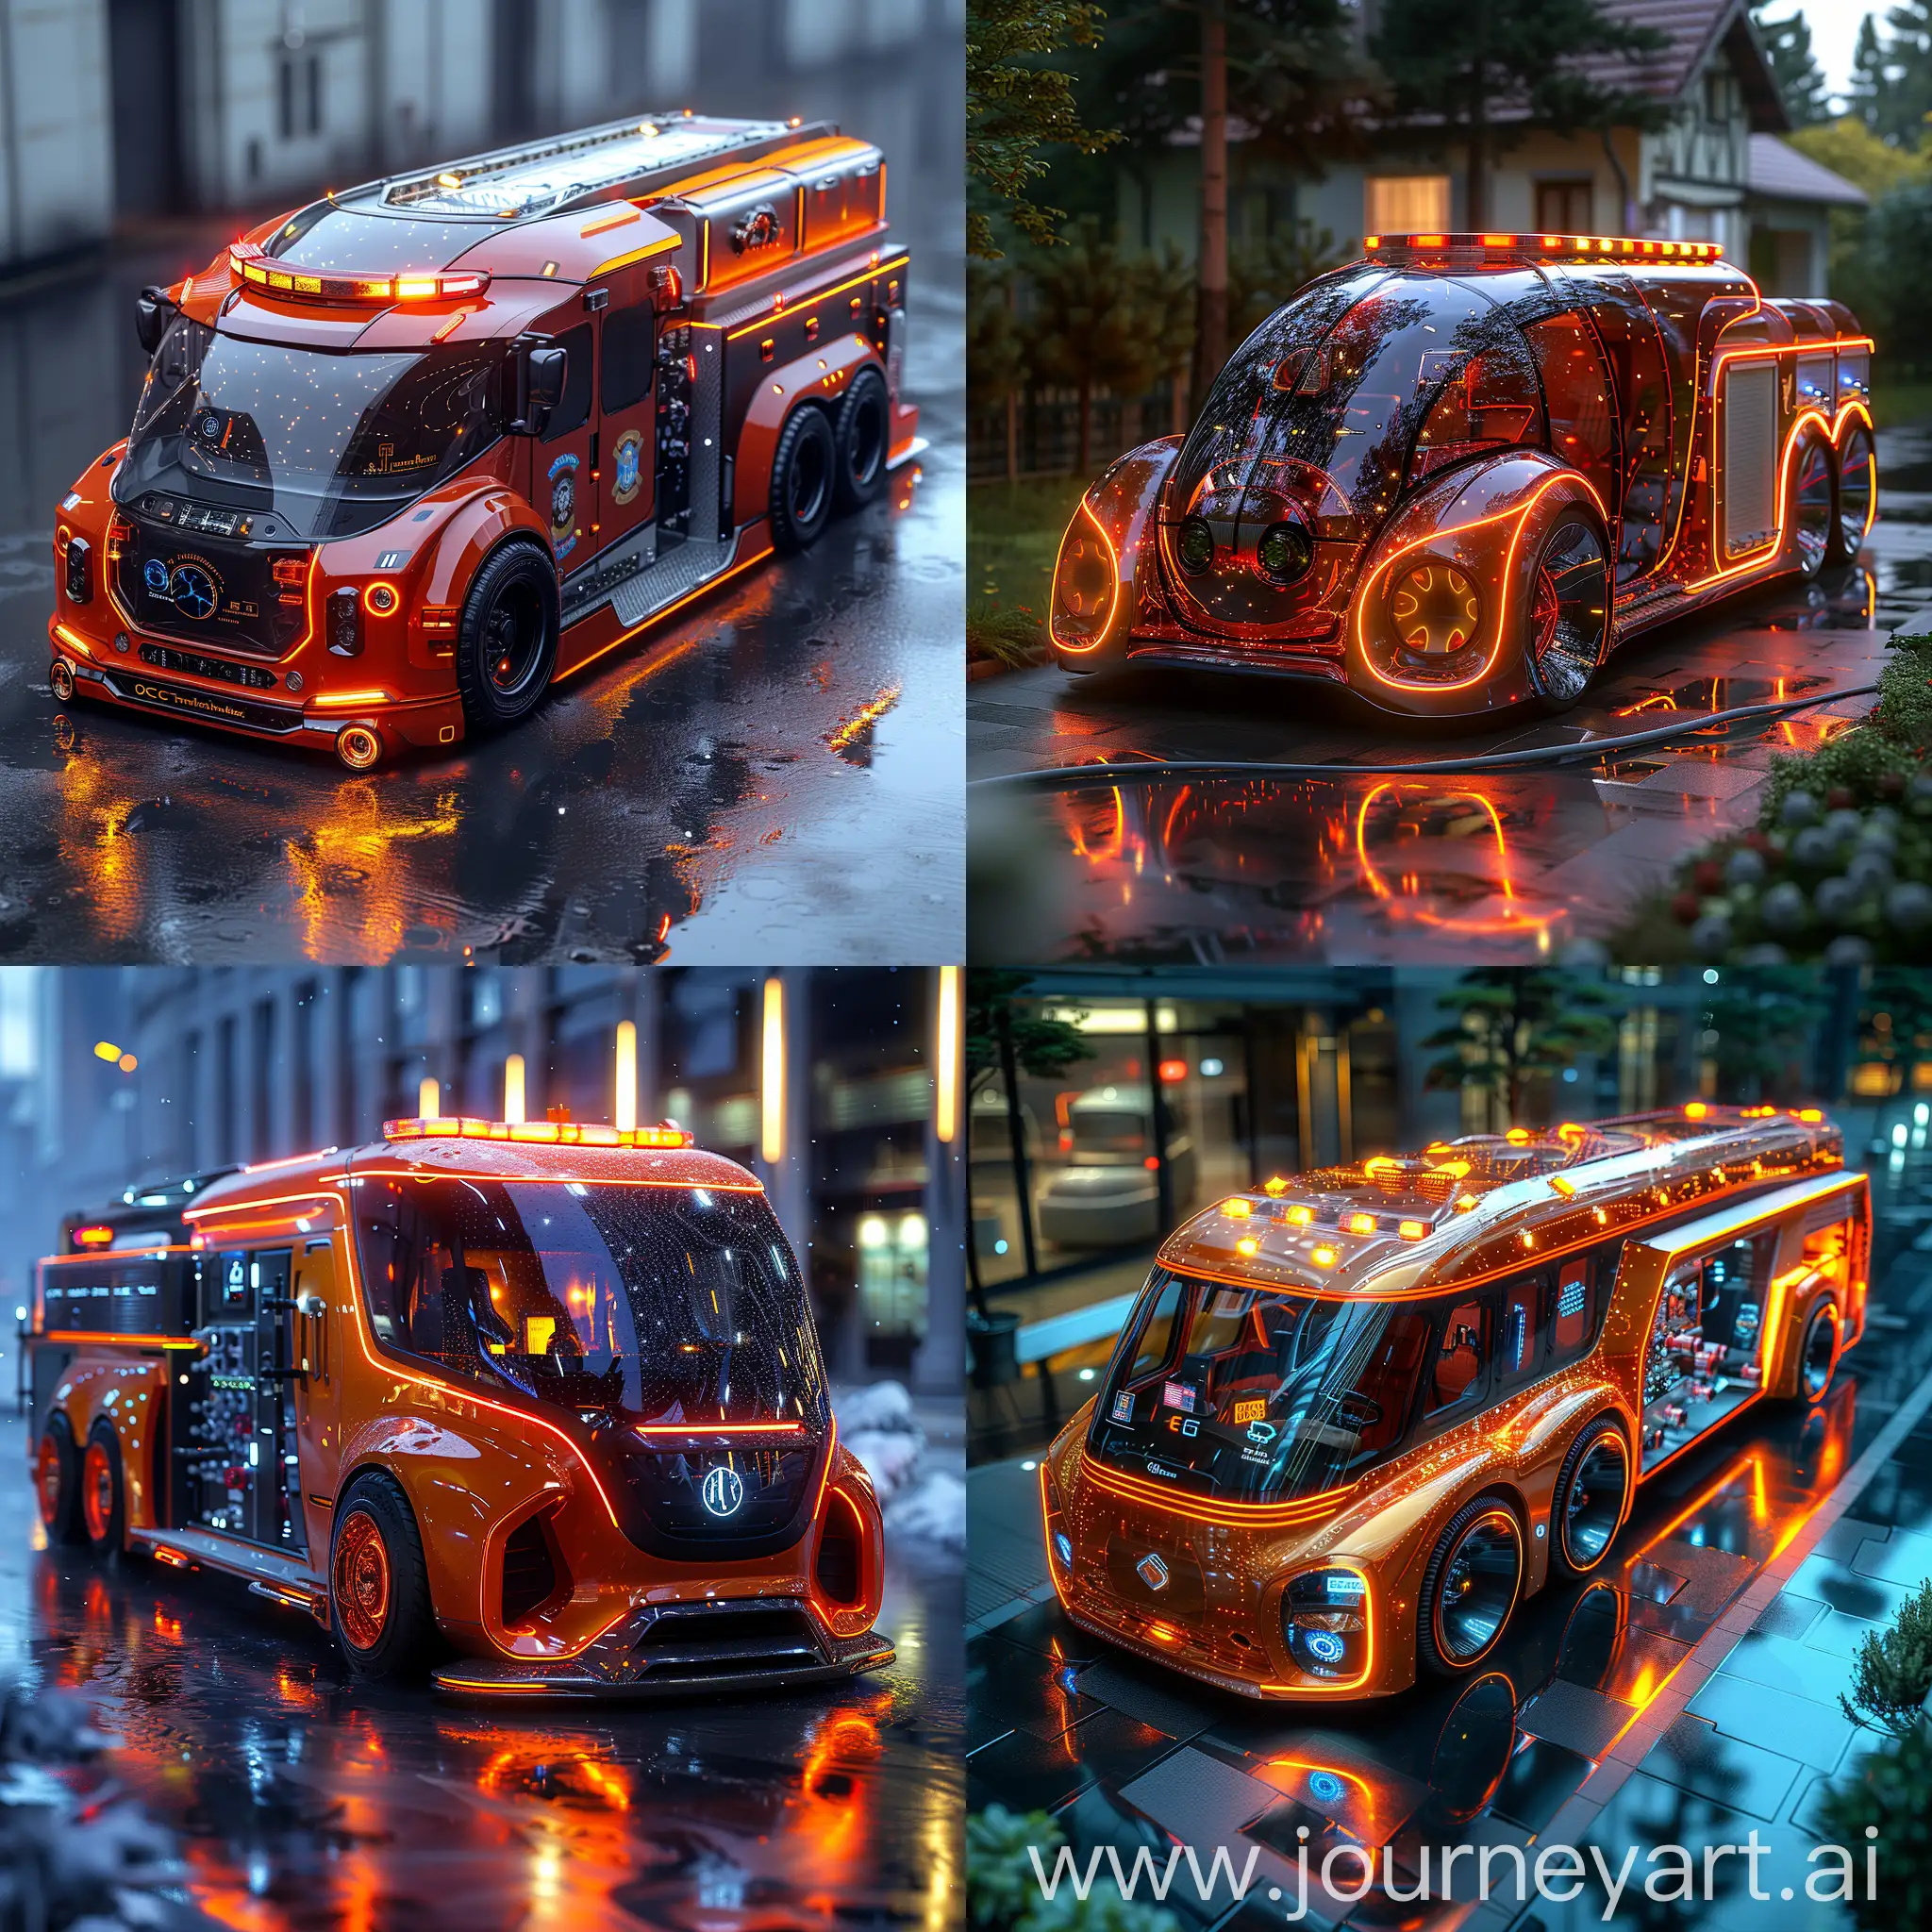 Futuristic fire truck, Electric or hydrogen fuel cell powertrain, Solar panels, Regenerative braking, Lightweight materials, Advanced battery technology, Intelligent routing and navigation systems, Energy-efficient LED lighting, Sustainable interior materials, Telematics and connectivity, Autonomous driving capabilities, Advanced driver assistance systems (ADAS), Augmented reality windshield display, Biometric sensors, ehicle-to-vehicle communication (V2V), Remote diagnostics and maintenance, Advanced infotainment system, 360-degree camera system, Advanced connectivity features, Artificial intelligence assistant, In-cabin biometric sensors, Heads-up display (HUD), Driver monitoring system, Virtual assistant, Smart storage solutions, Wireless charging pads, Multi-functional touchscreen display, In-cabin air purification system, Advanced audio system, Integrated camera system, octane render --stylize 1000